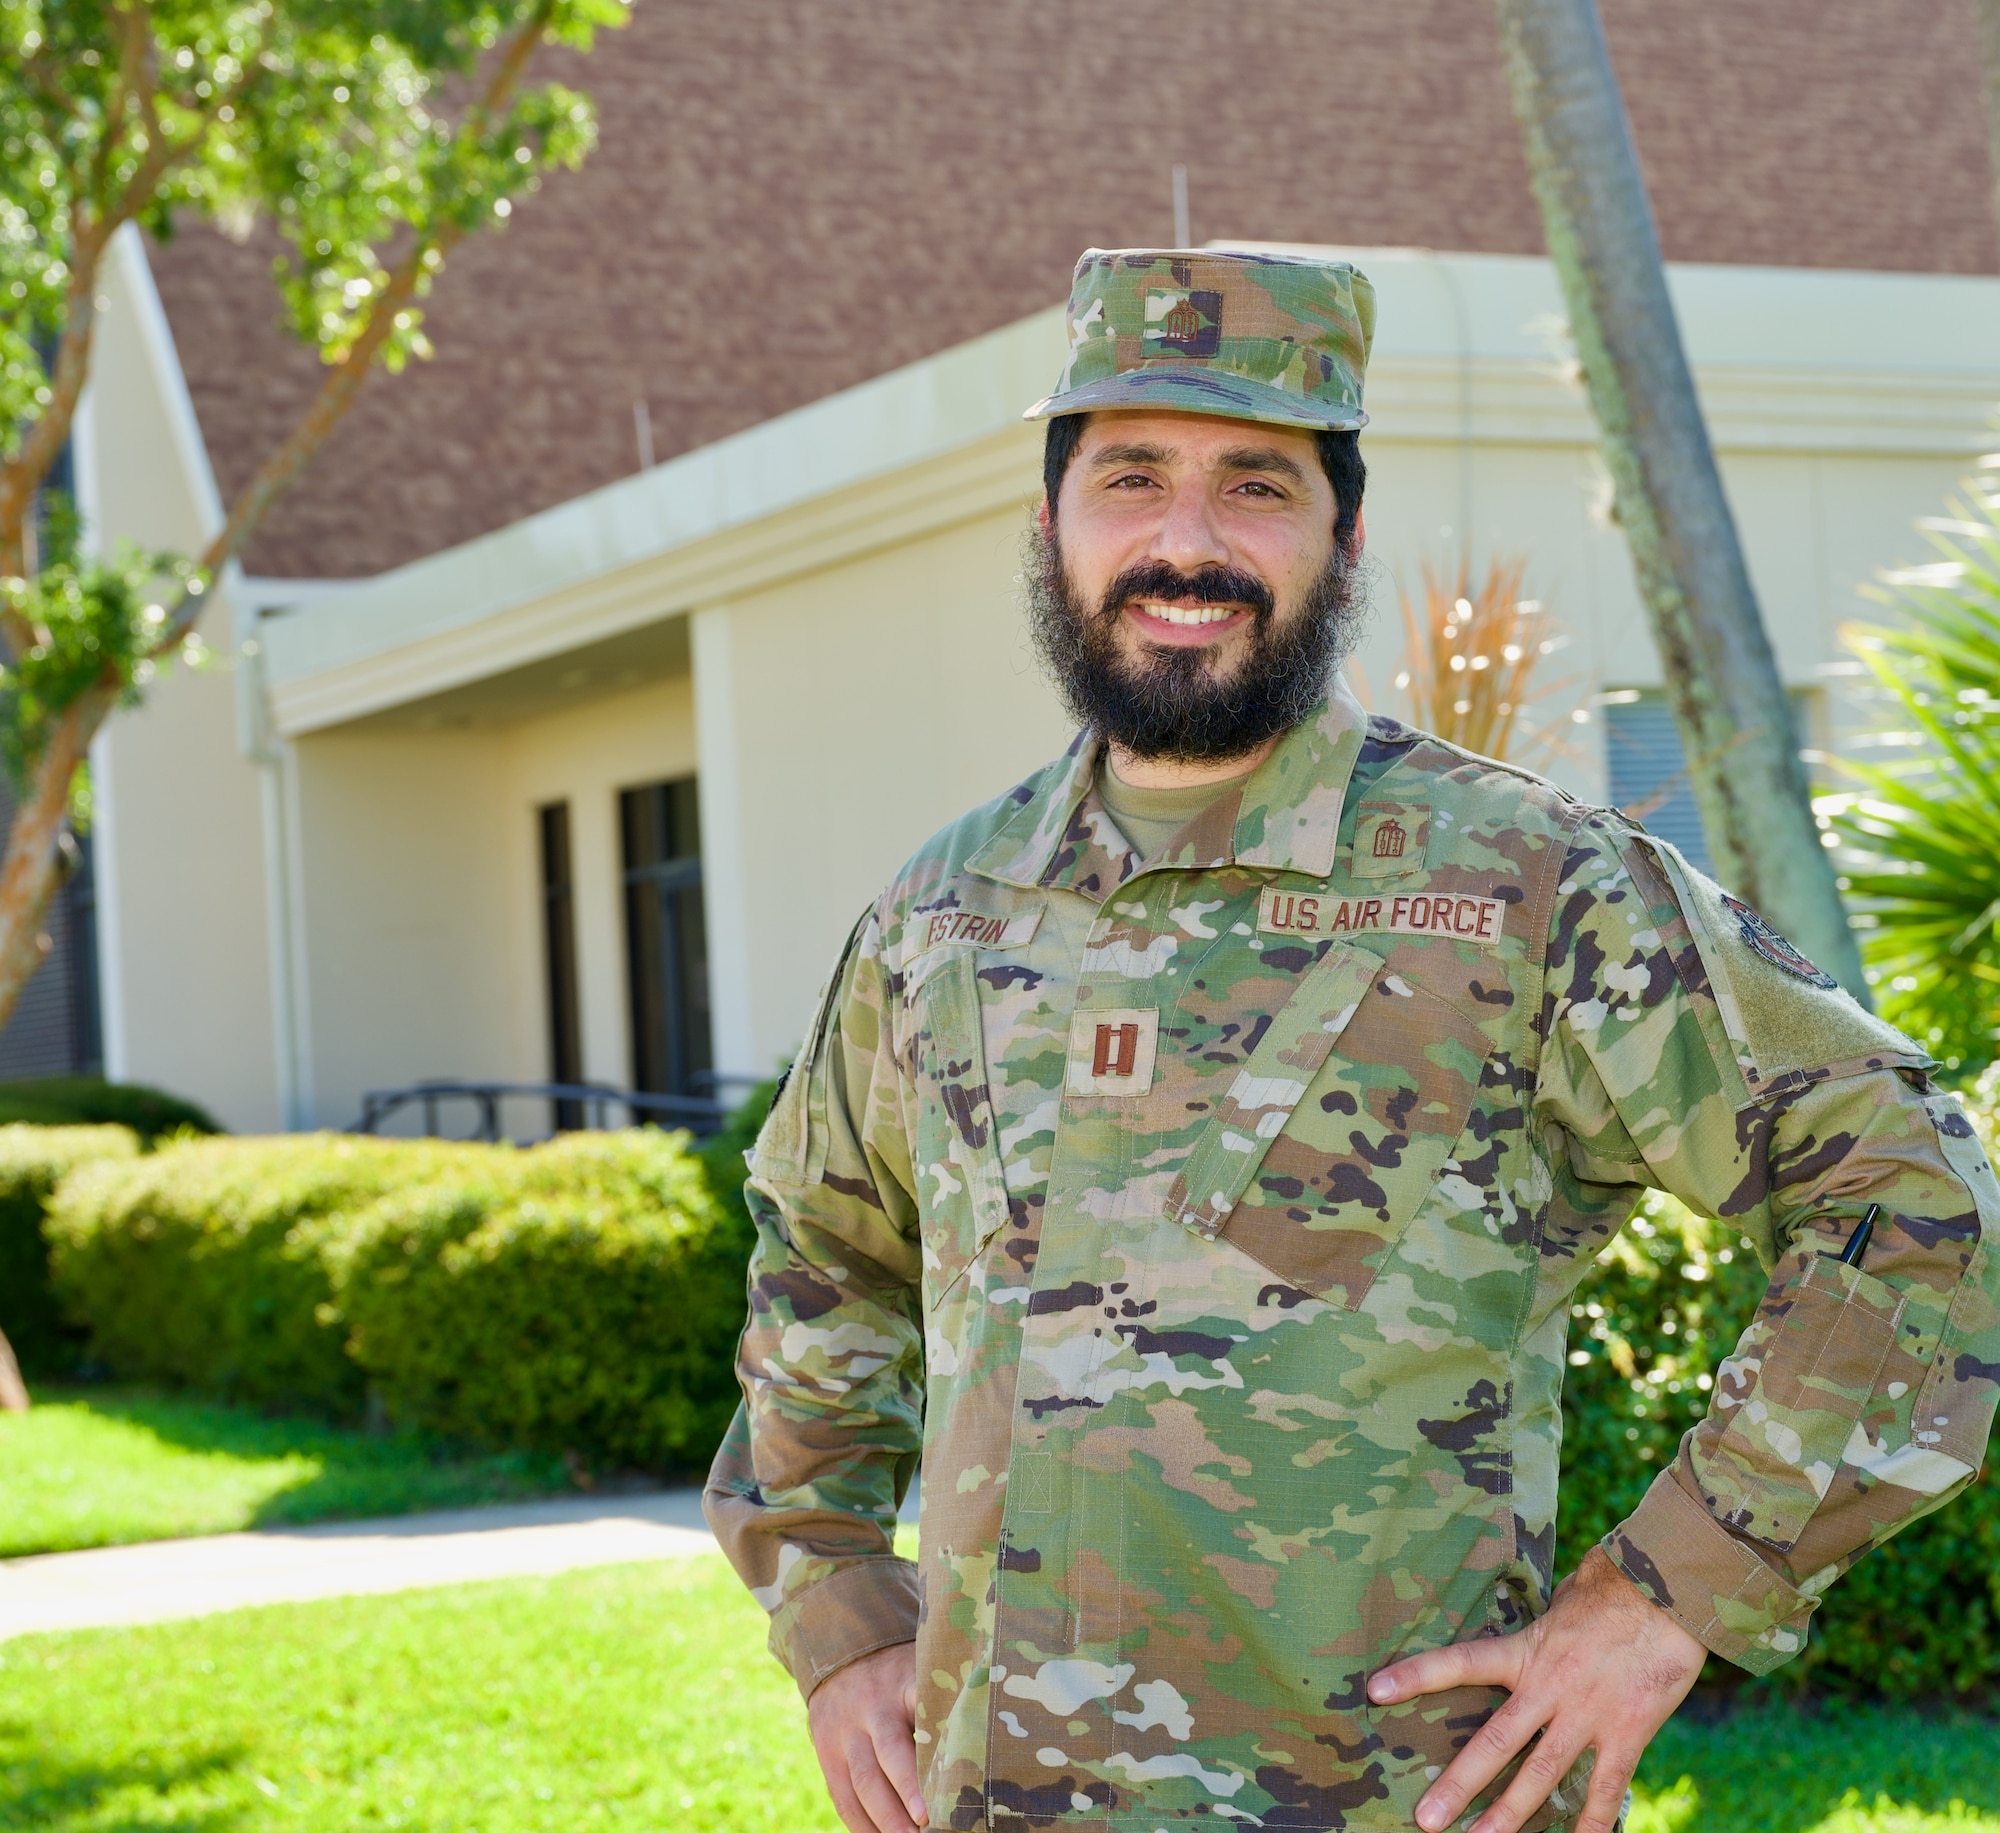 Capt. Eli Estrin, Readiness Integration Organization Detachment 6 Chaplain, poses for a photo in front of the 6th Air Refueling Wing Chapel, MacDill Air Force Base, Florida, July 20, 2021. Estrin supported victims and first responders in Surfside, Florida, in the aftermath of the June 24, 2021 Champlain South Tower condominium collapse. (U.S. Air Force photo by Staff Sgt. Bradley Tipton)